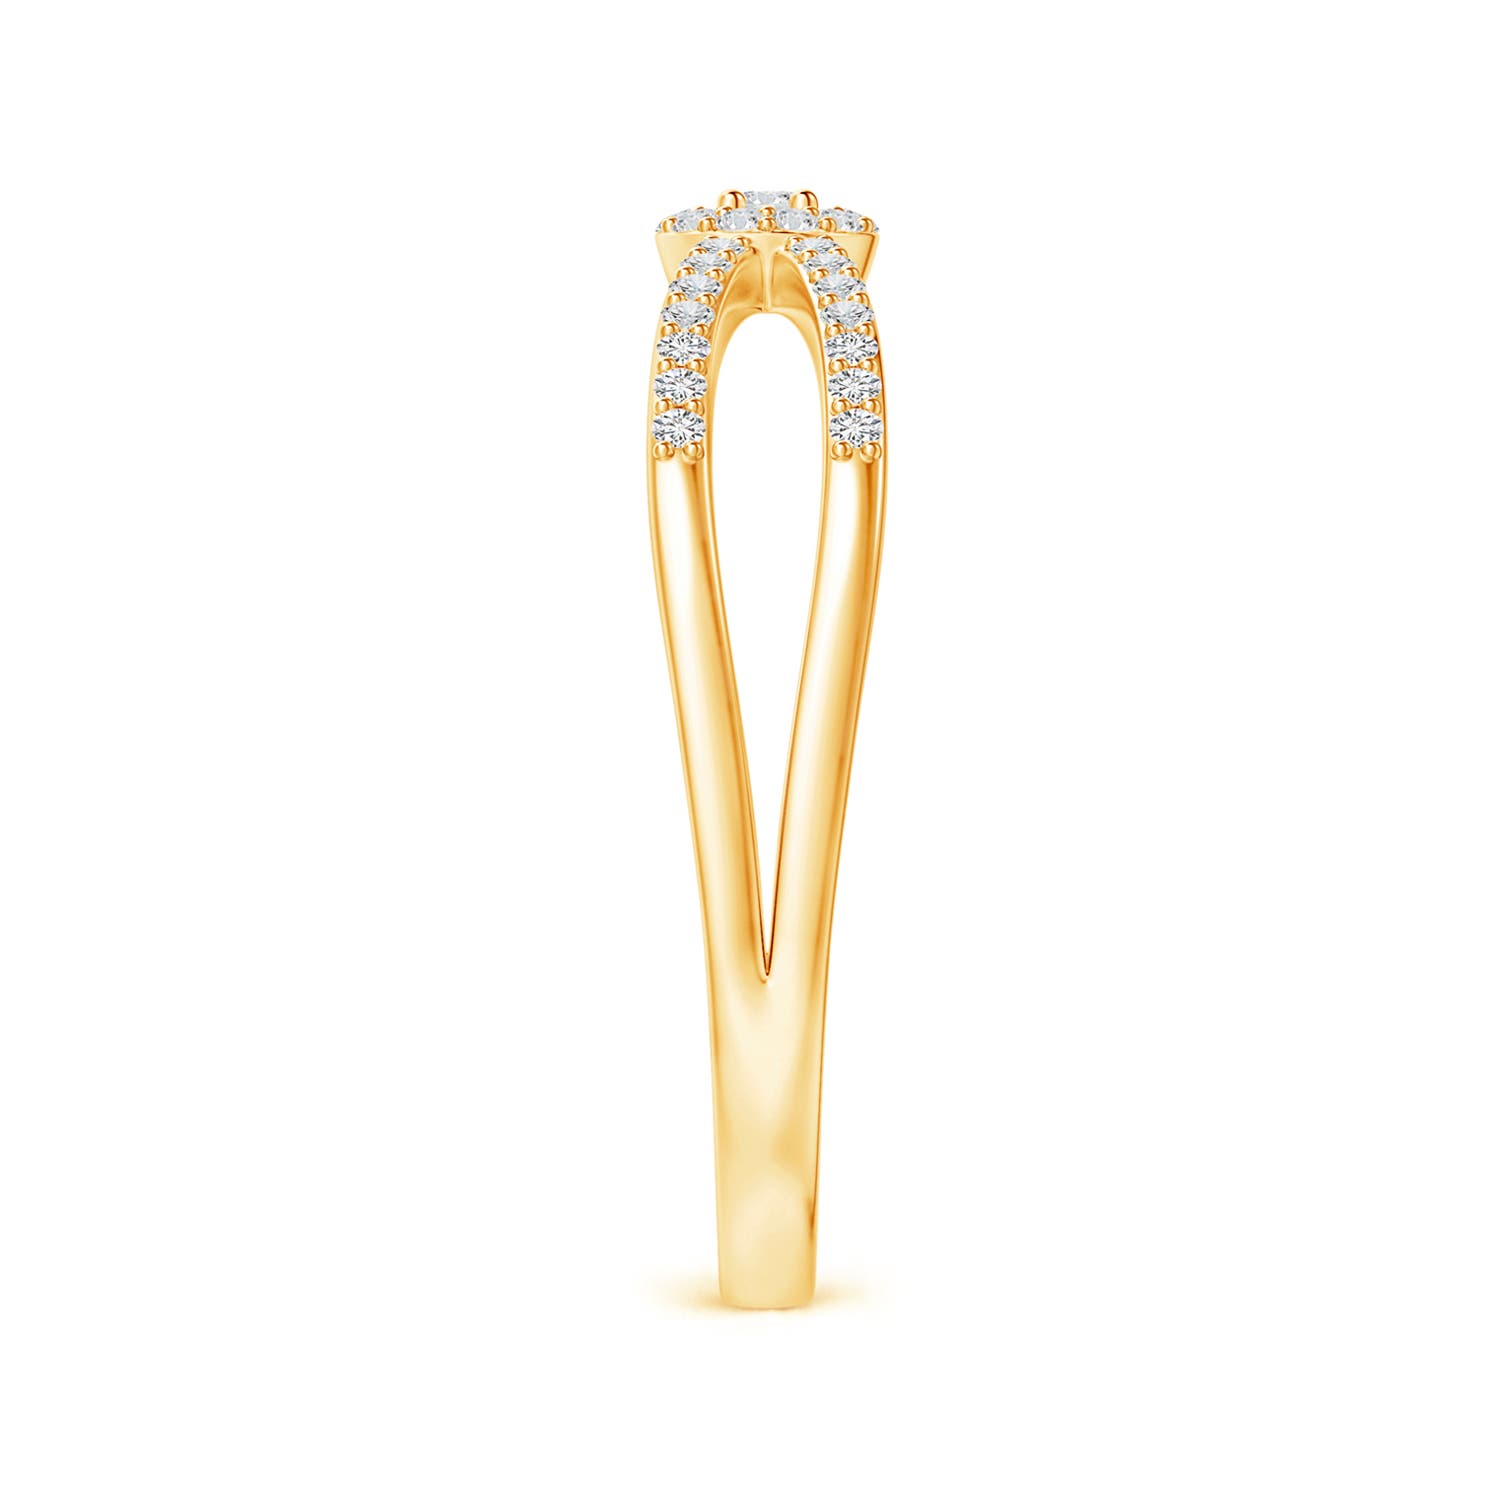 H, SI2 / 0.17 CT / 14 KT Yellow Gold